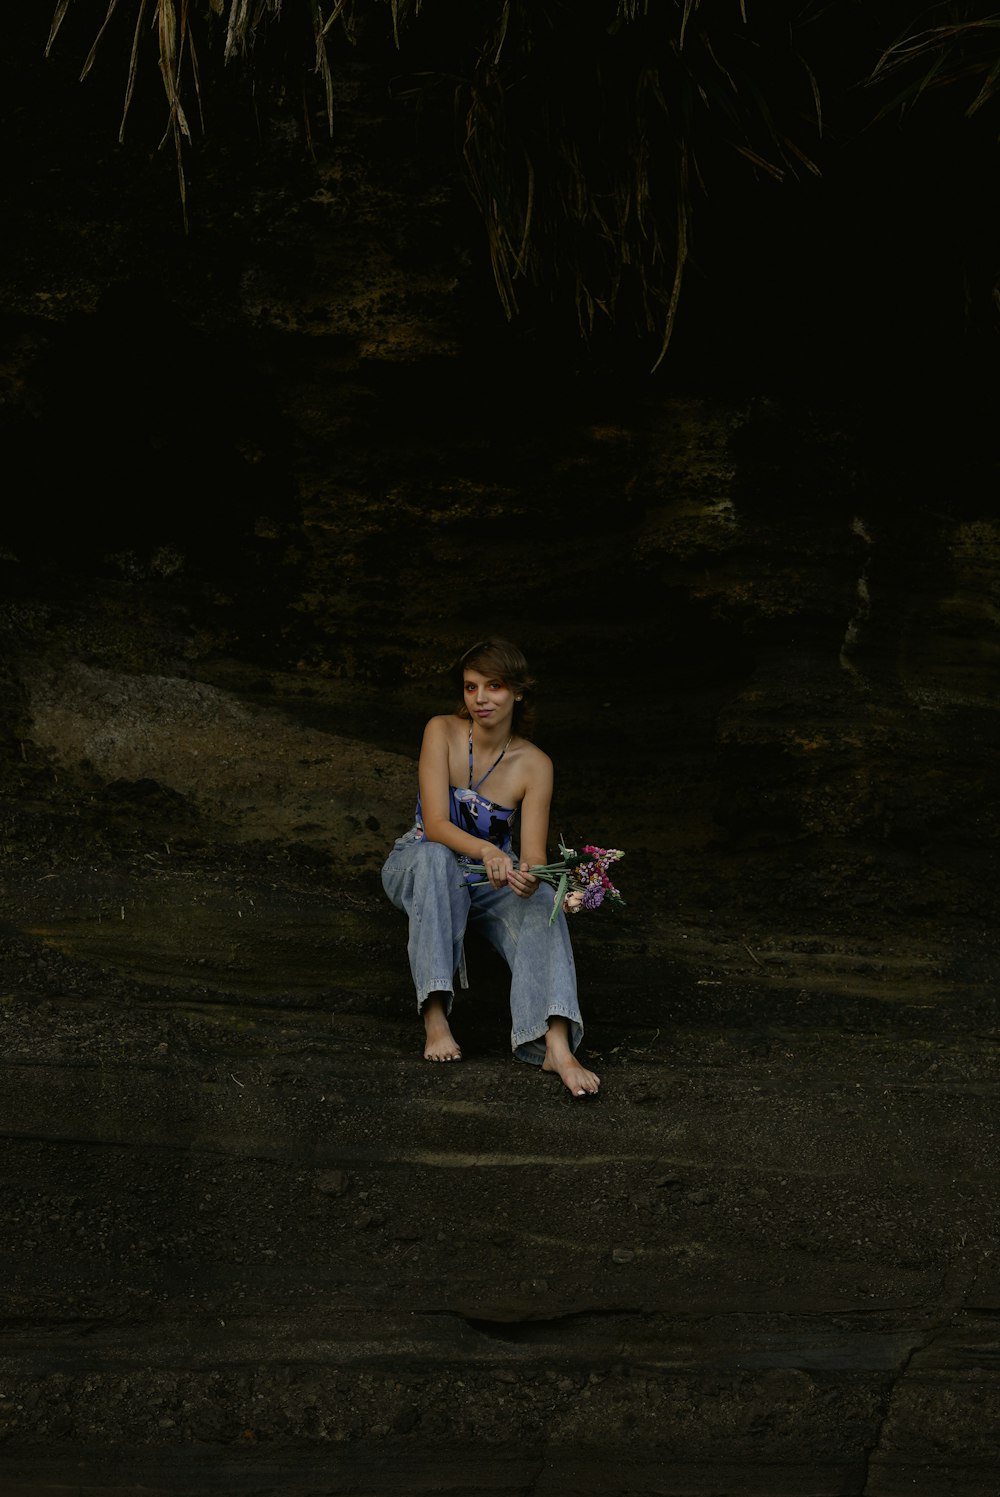 a person sitting on a wood floor holding flowers